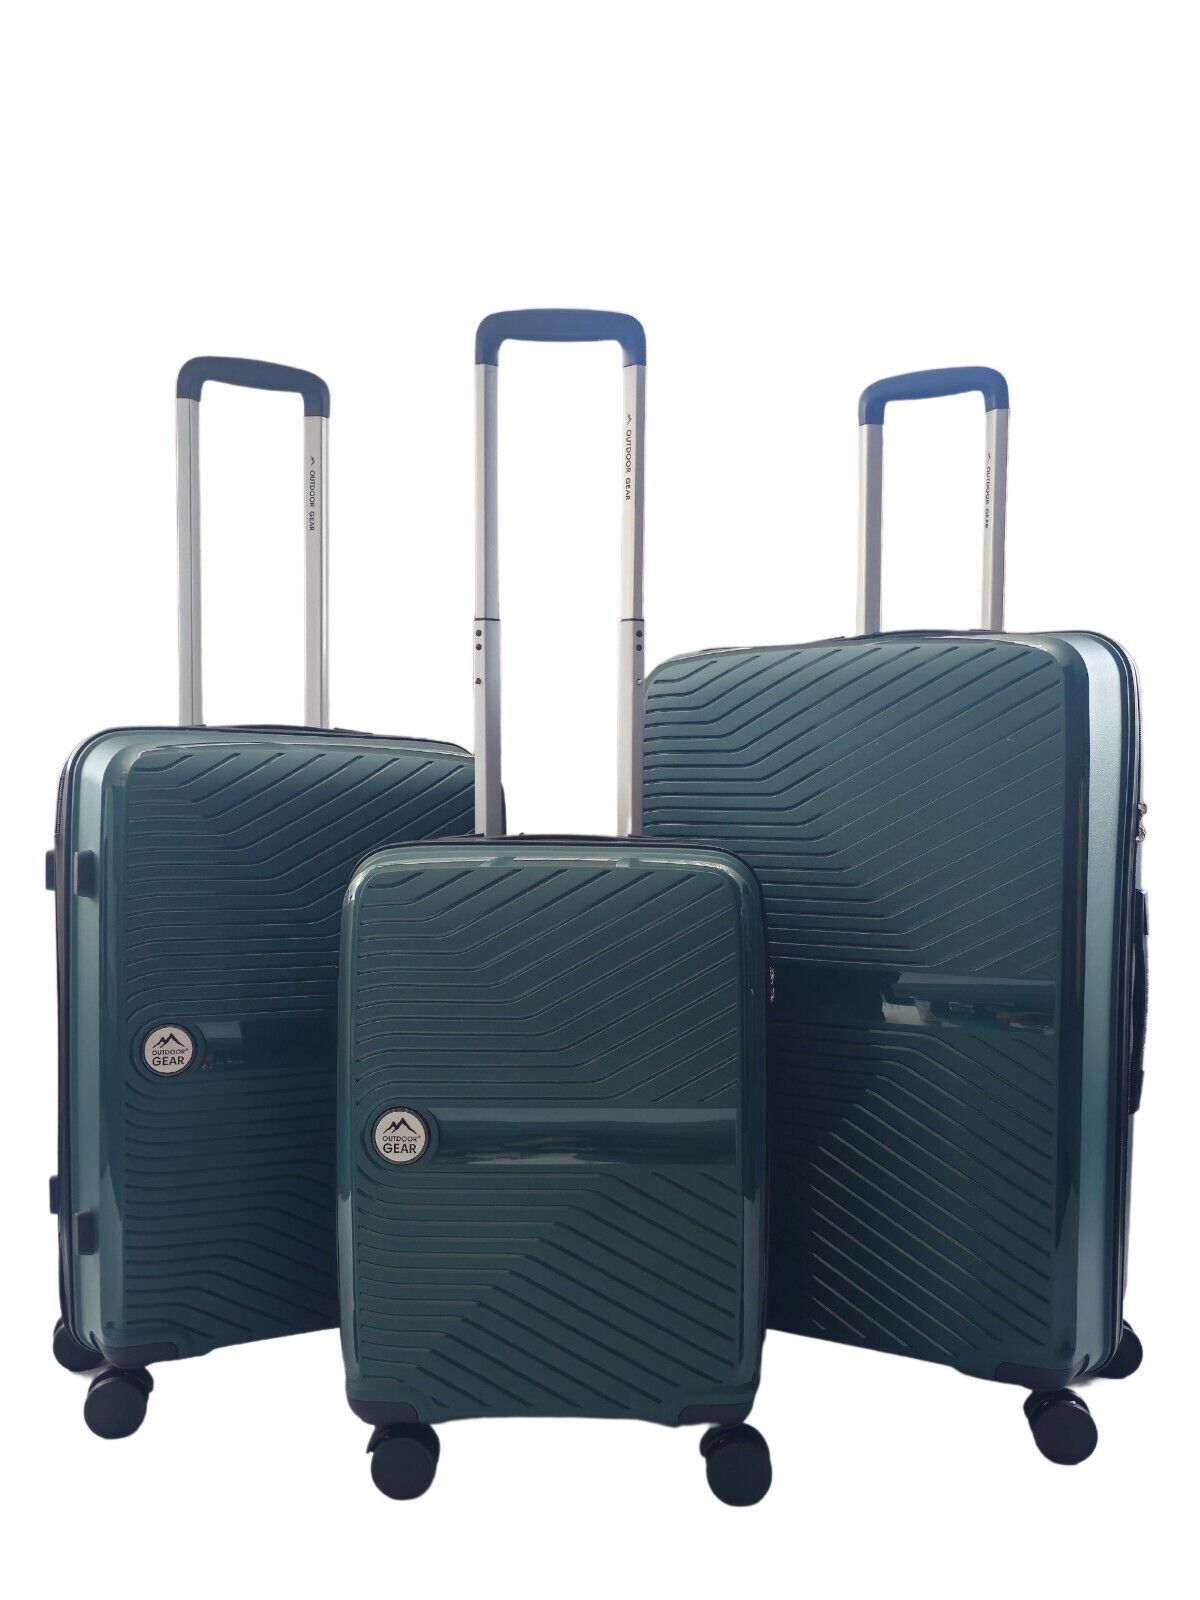 Abbeville Set of 3 Hard Shell Suitcase in Green